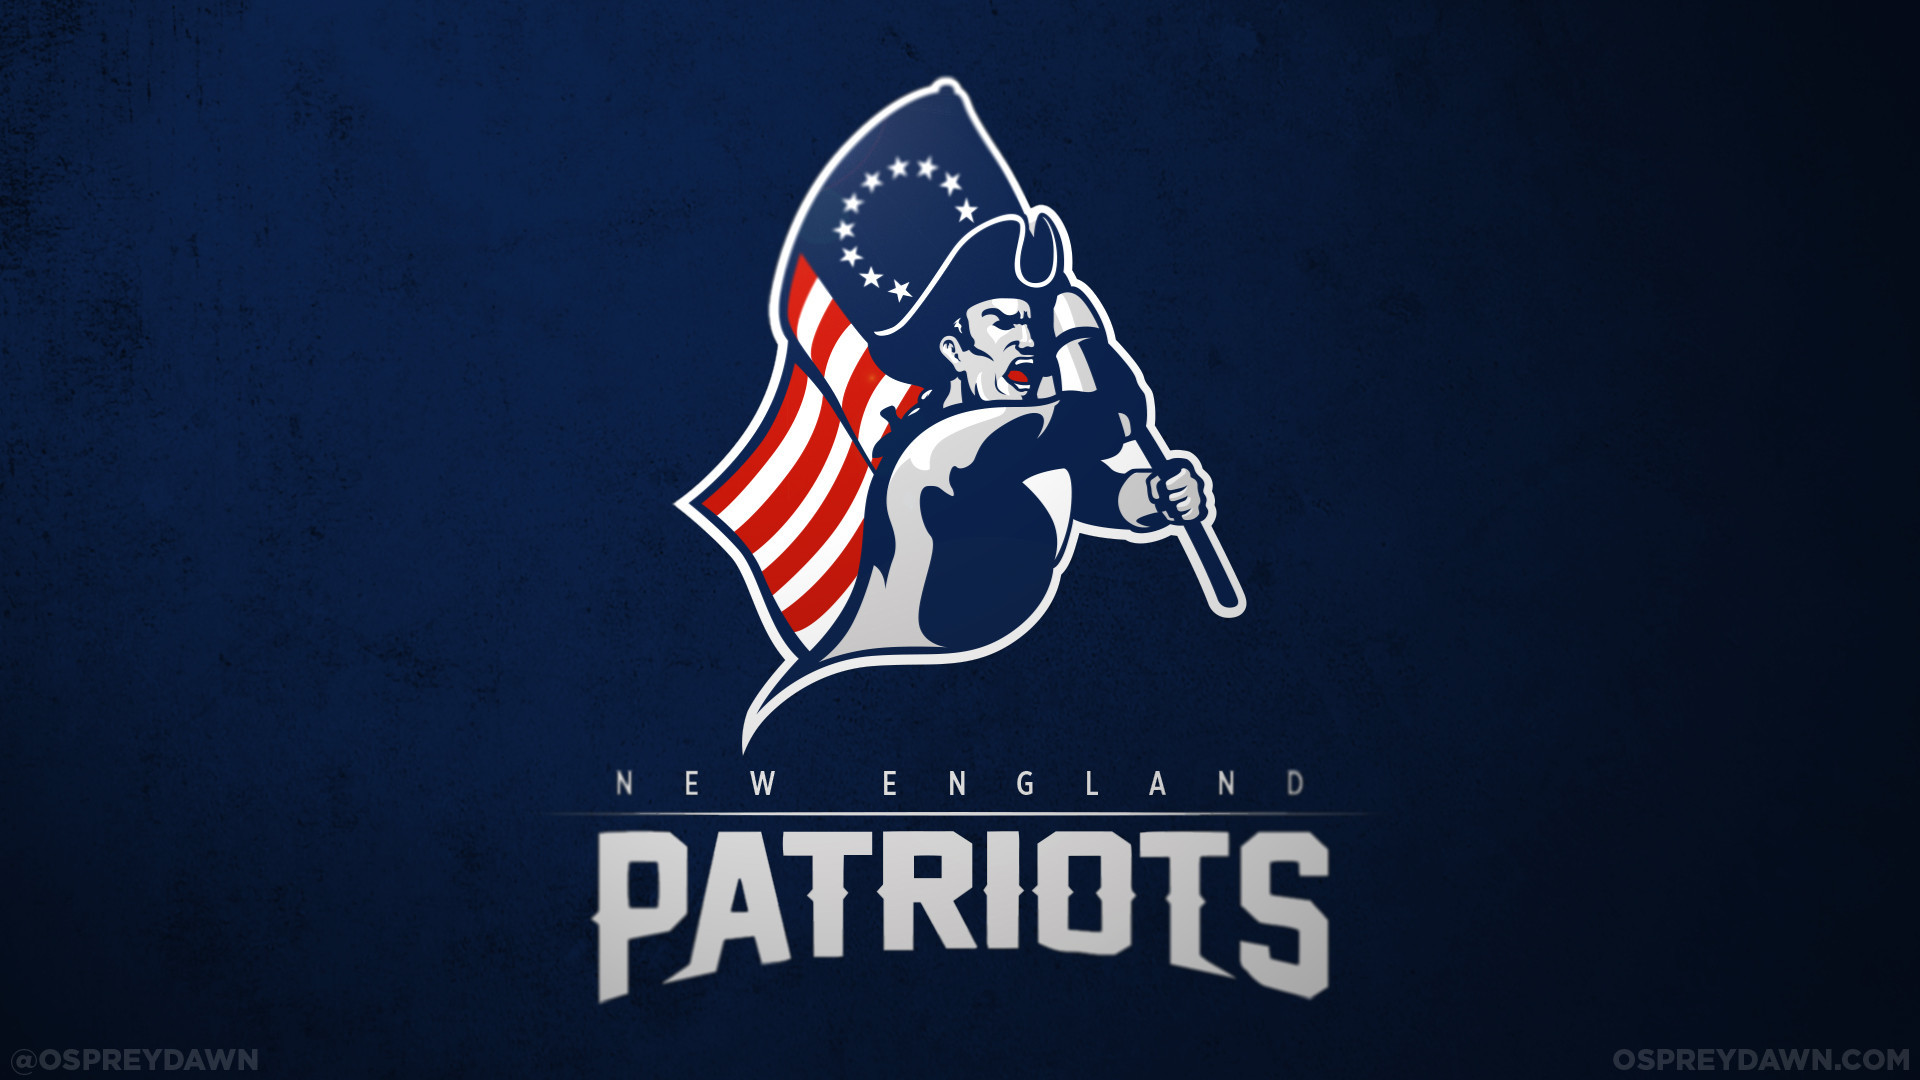 1920x1080 Fancy Nfl Logo Redesigns 54 About Remodel Best Logos With Nfl Logo Redesigns